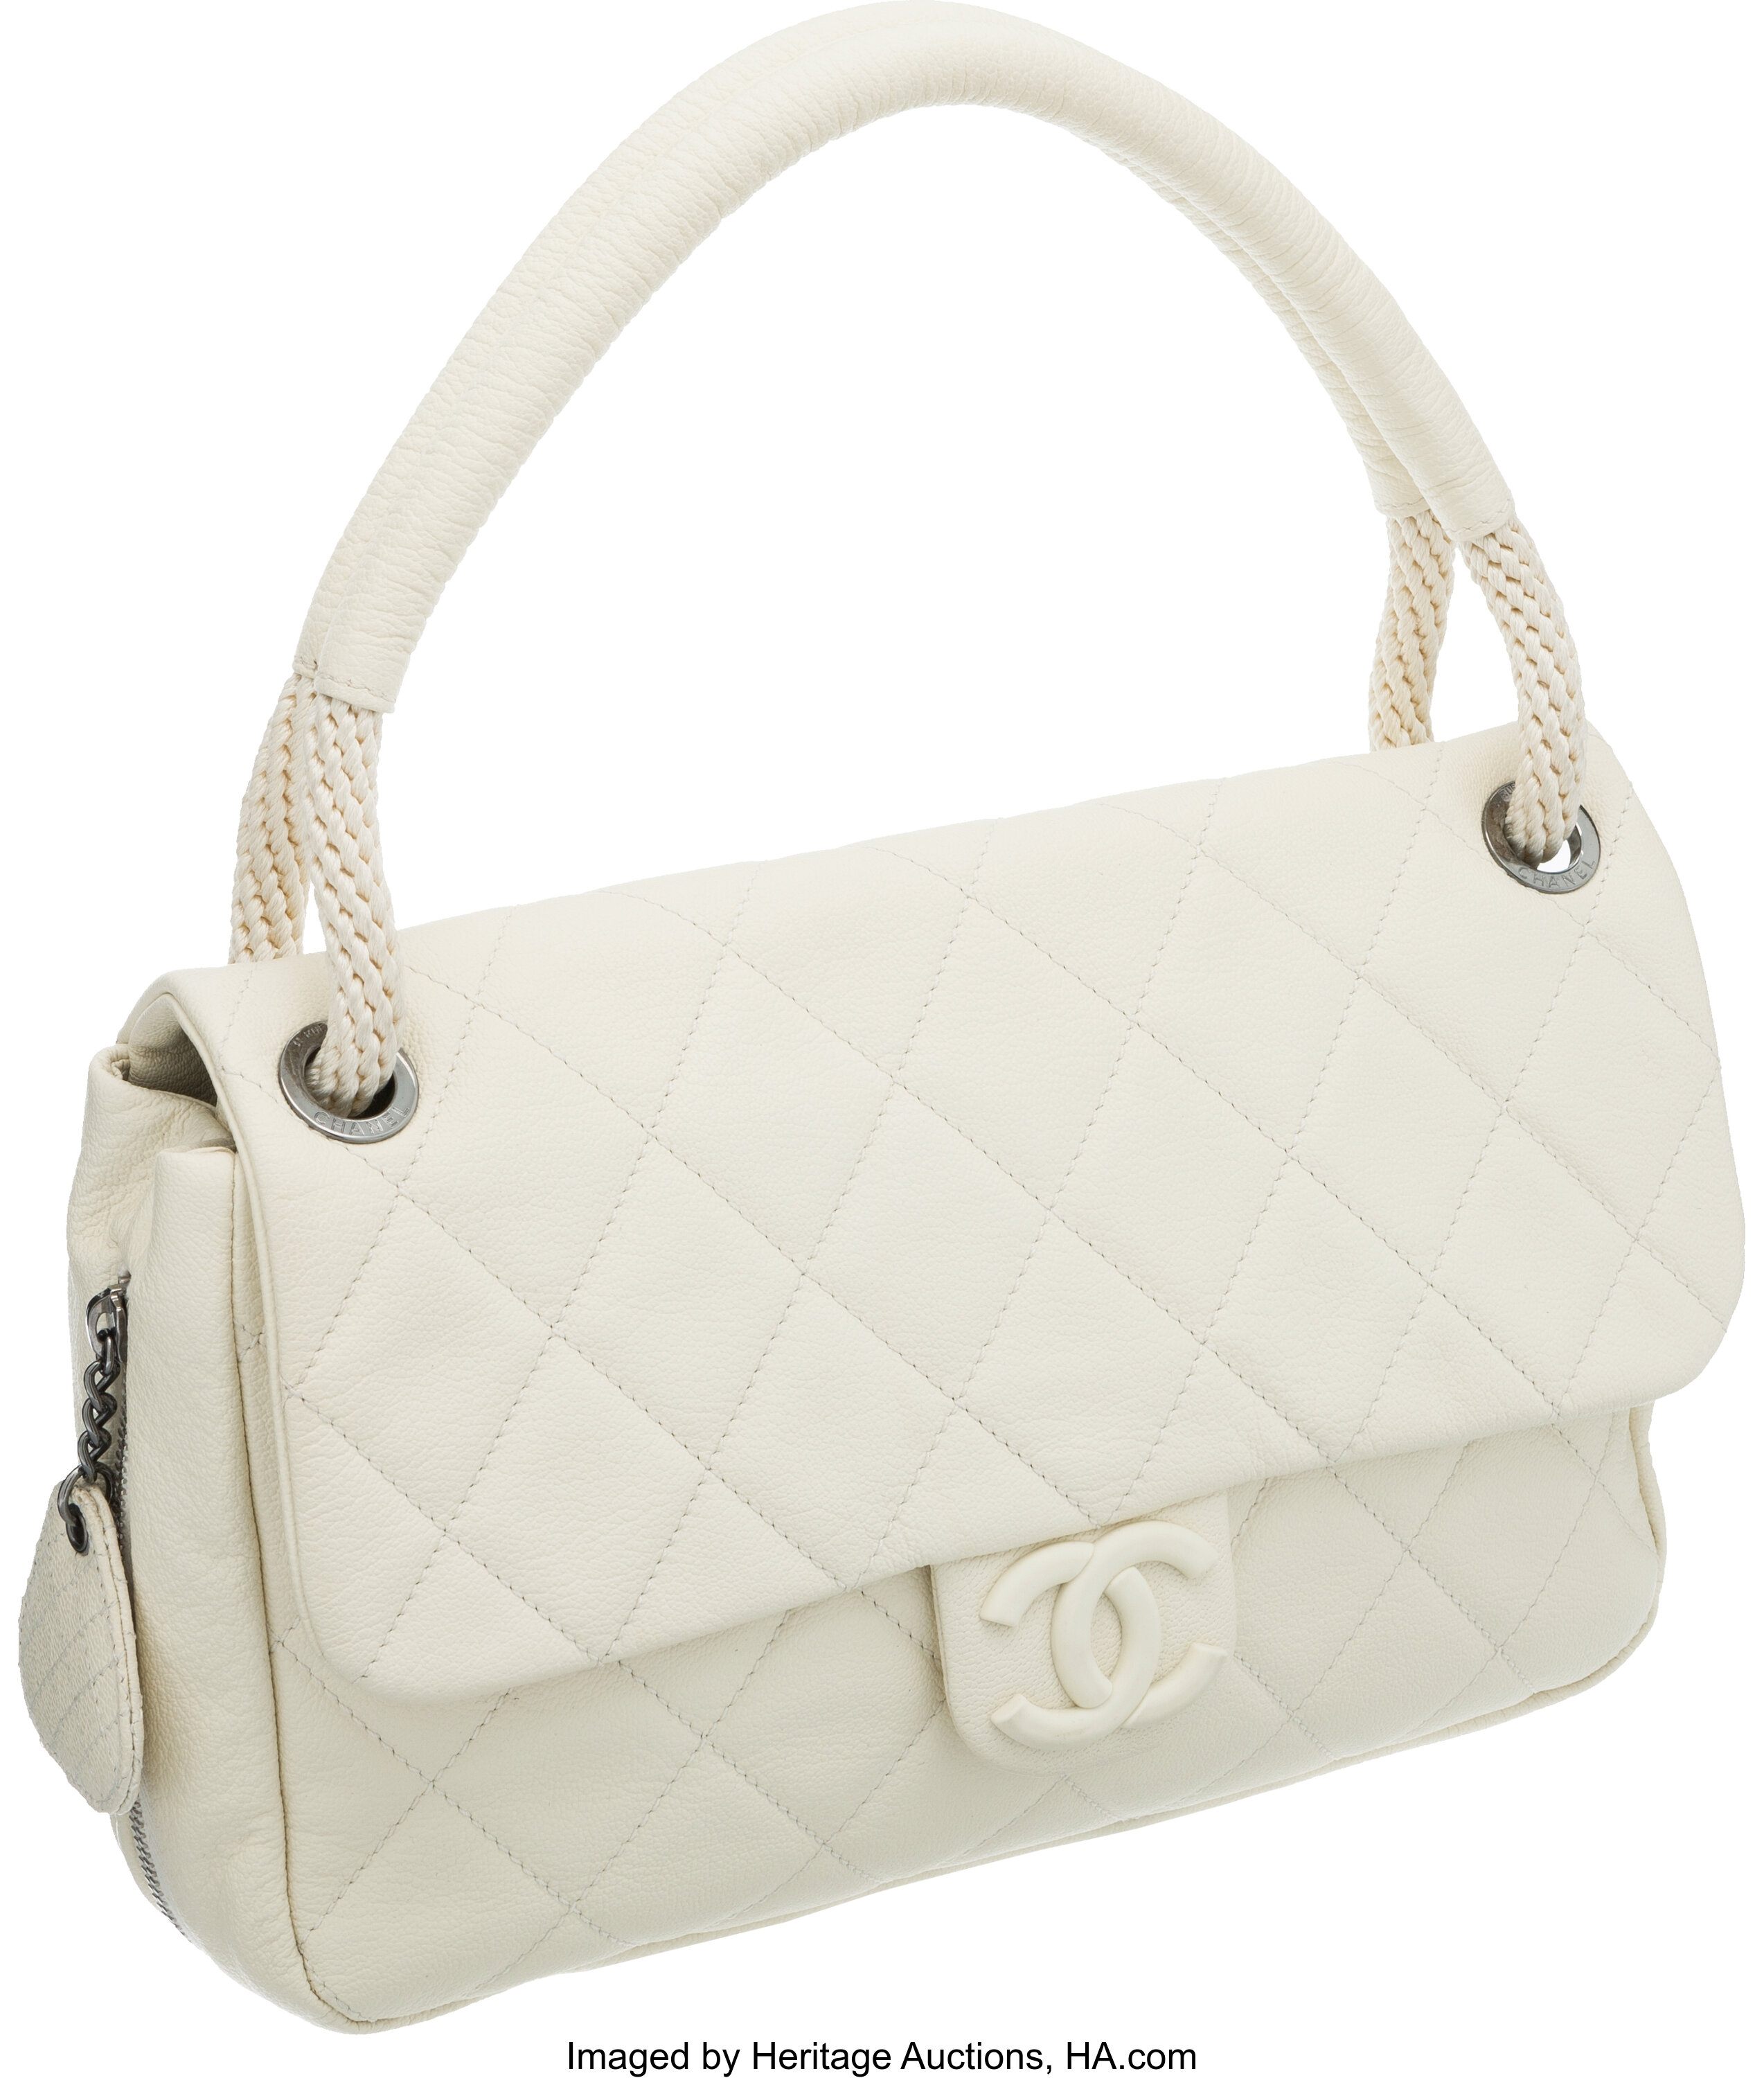 Chanel Cream Caviar Leather Flap Bag with Rope Handle.  Luxury